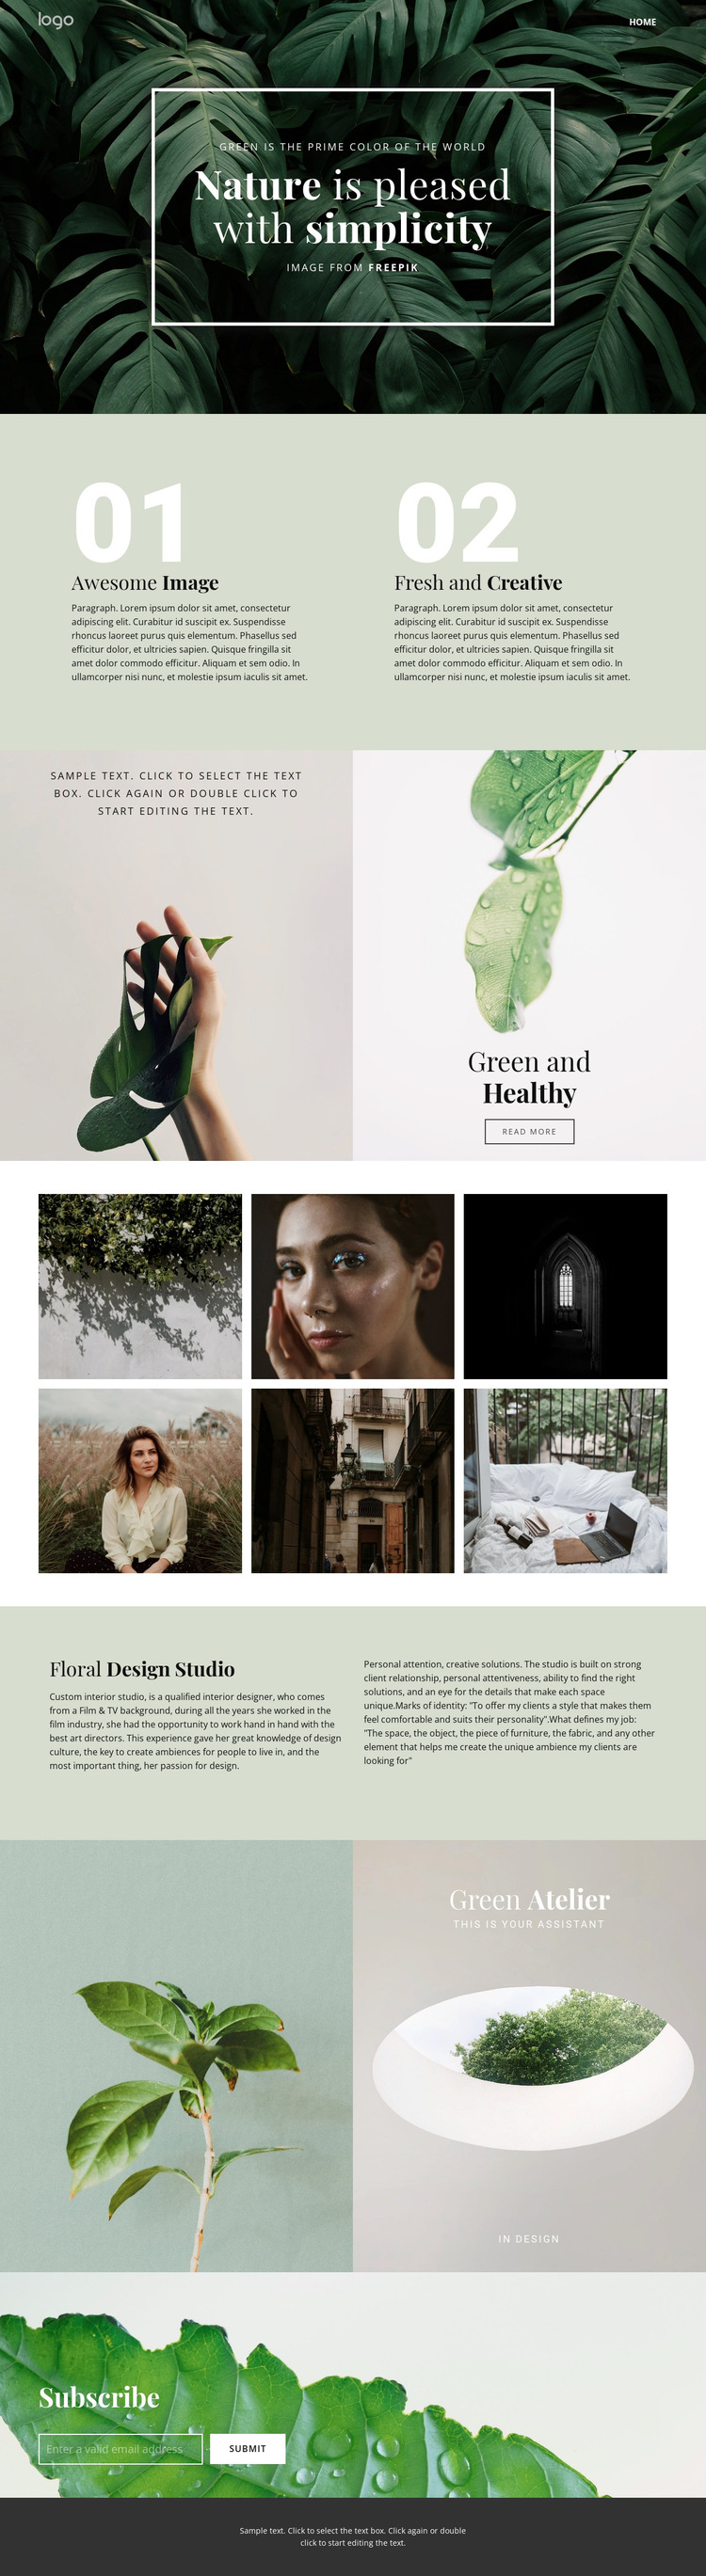 Beauty simplicity of nature HTML5 Template